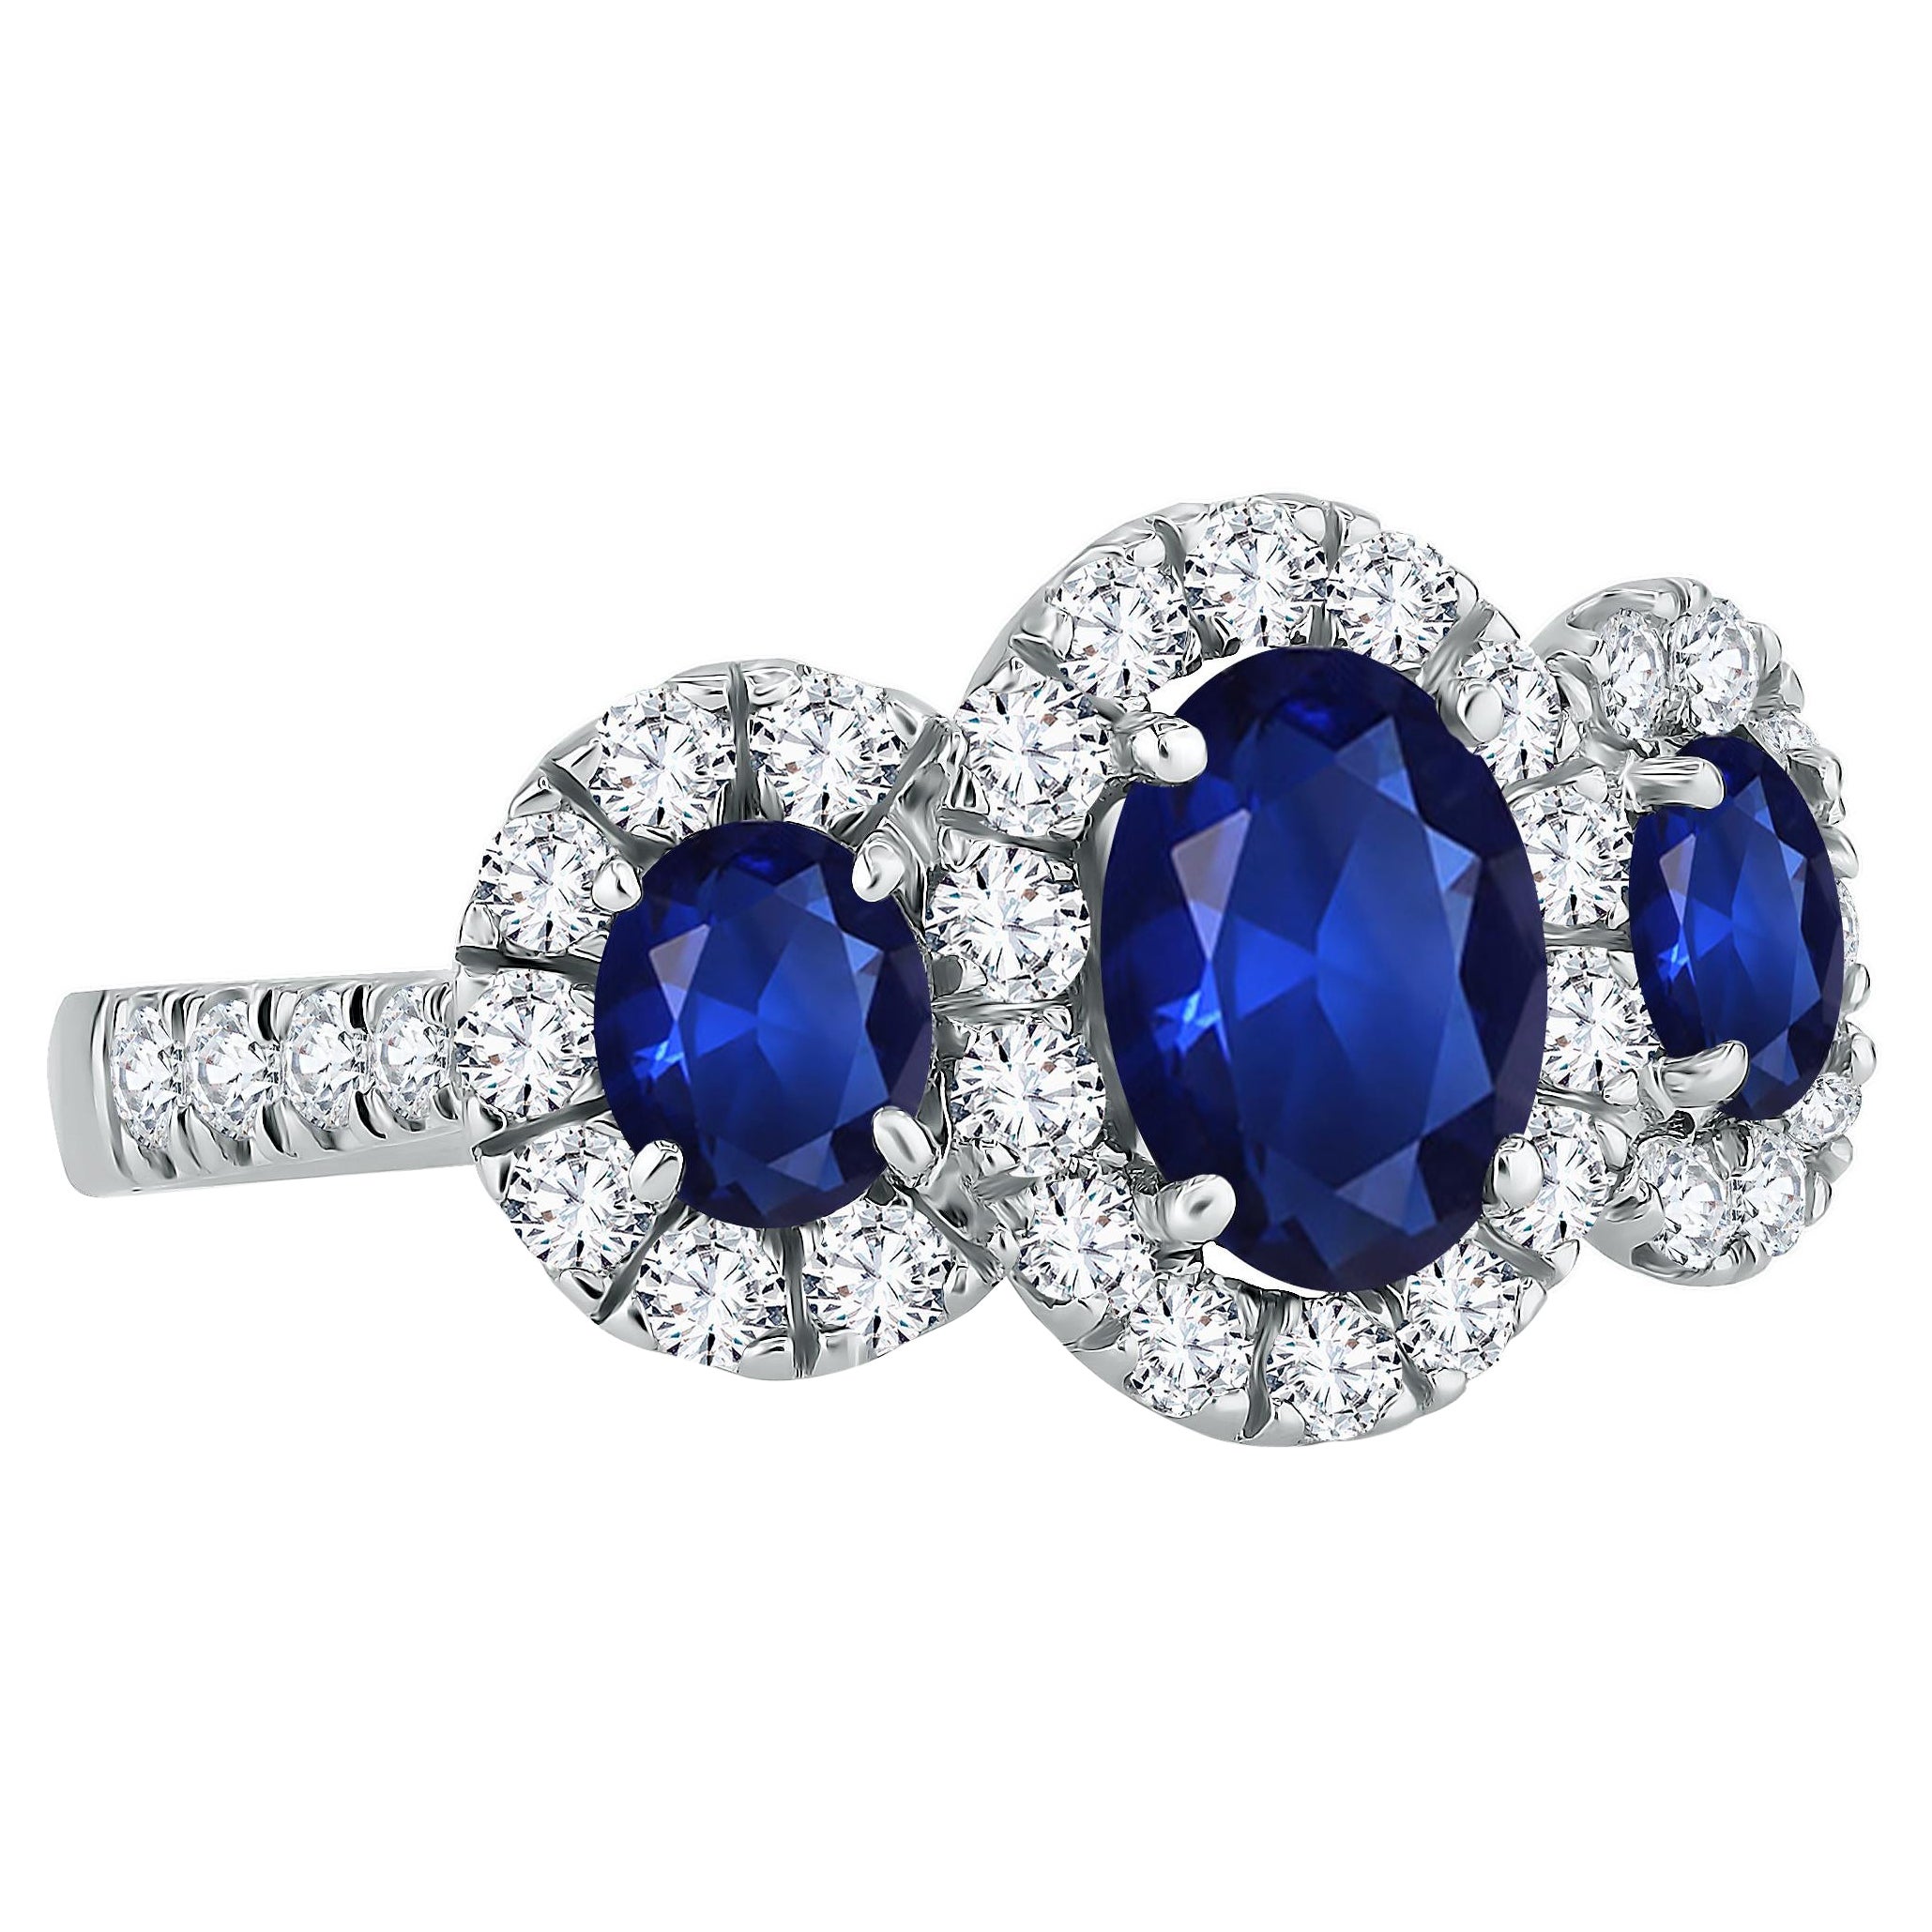 DiamondTown 2.45 Carat Oval Cut Sapphire and 0.91 Ct Diamond Ring in 18k White For Sale